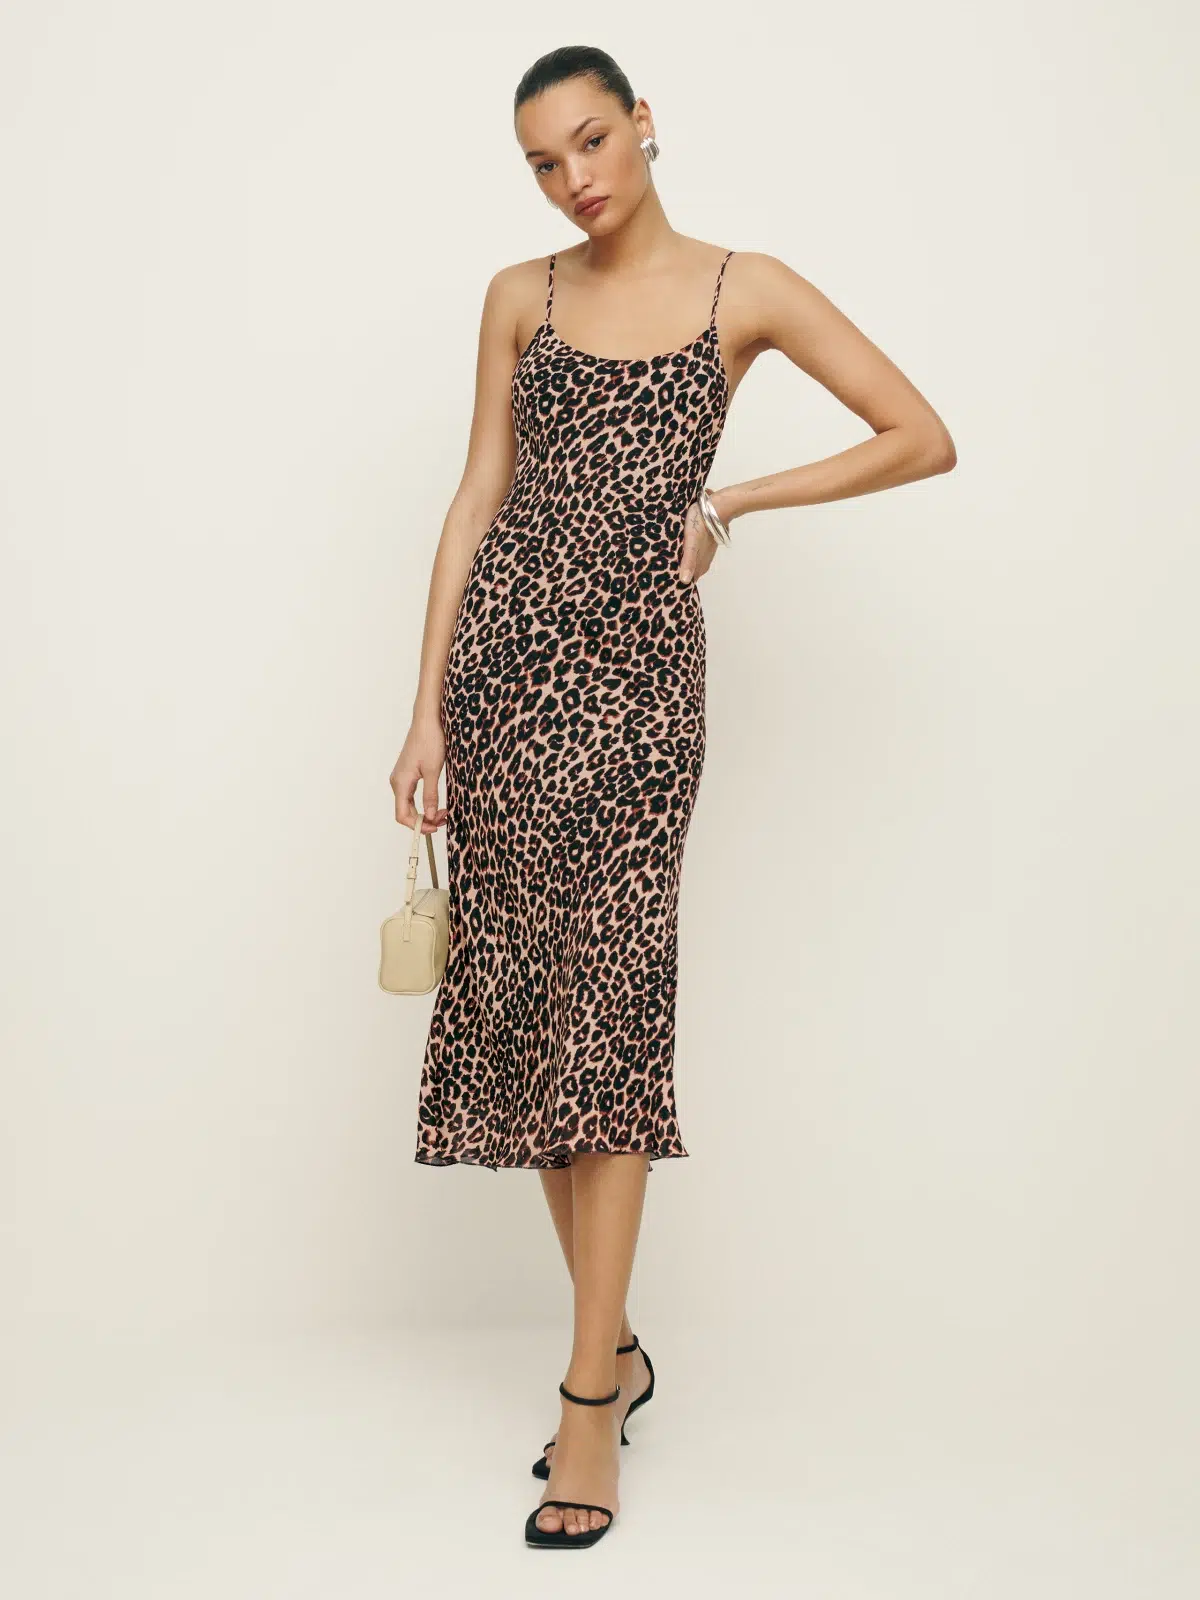 Woman posing in a leopard print dress with a small handbag and black heels.